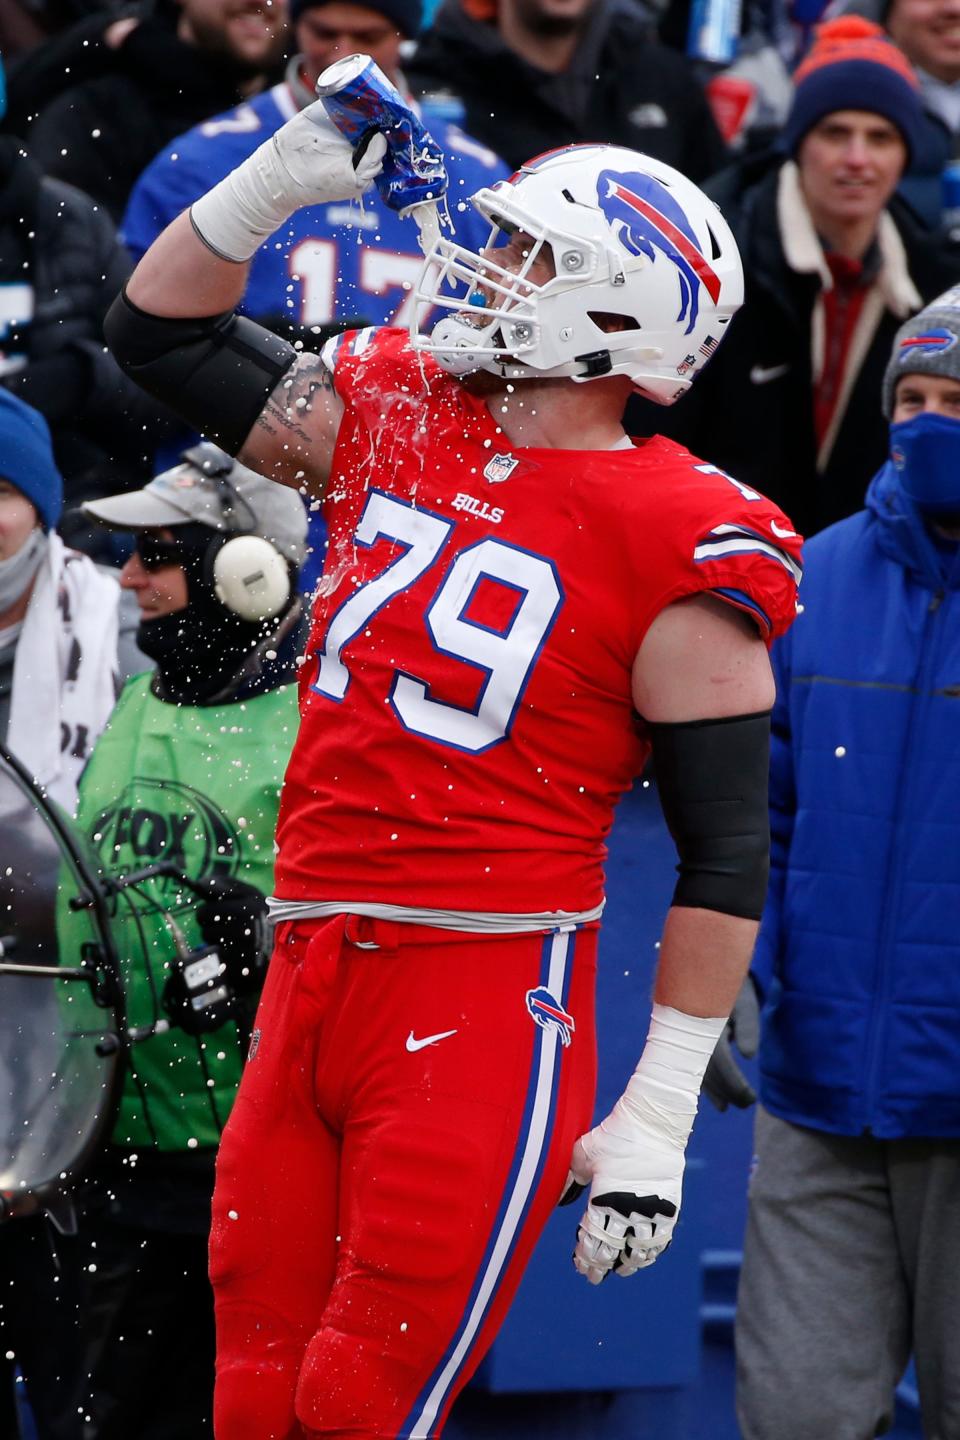 Buffalo Bills offensive tackle Spencer Brown (79) celebrates after a touchdown during the first half of an NFL football game against the Carolina Panthers in Orchard park, N.Y., Sunday Dec. 19, 2021. (AP/ Photo Jeffrey T. Barnes)